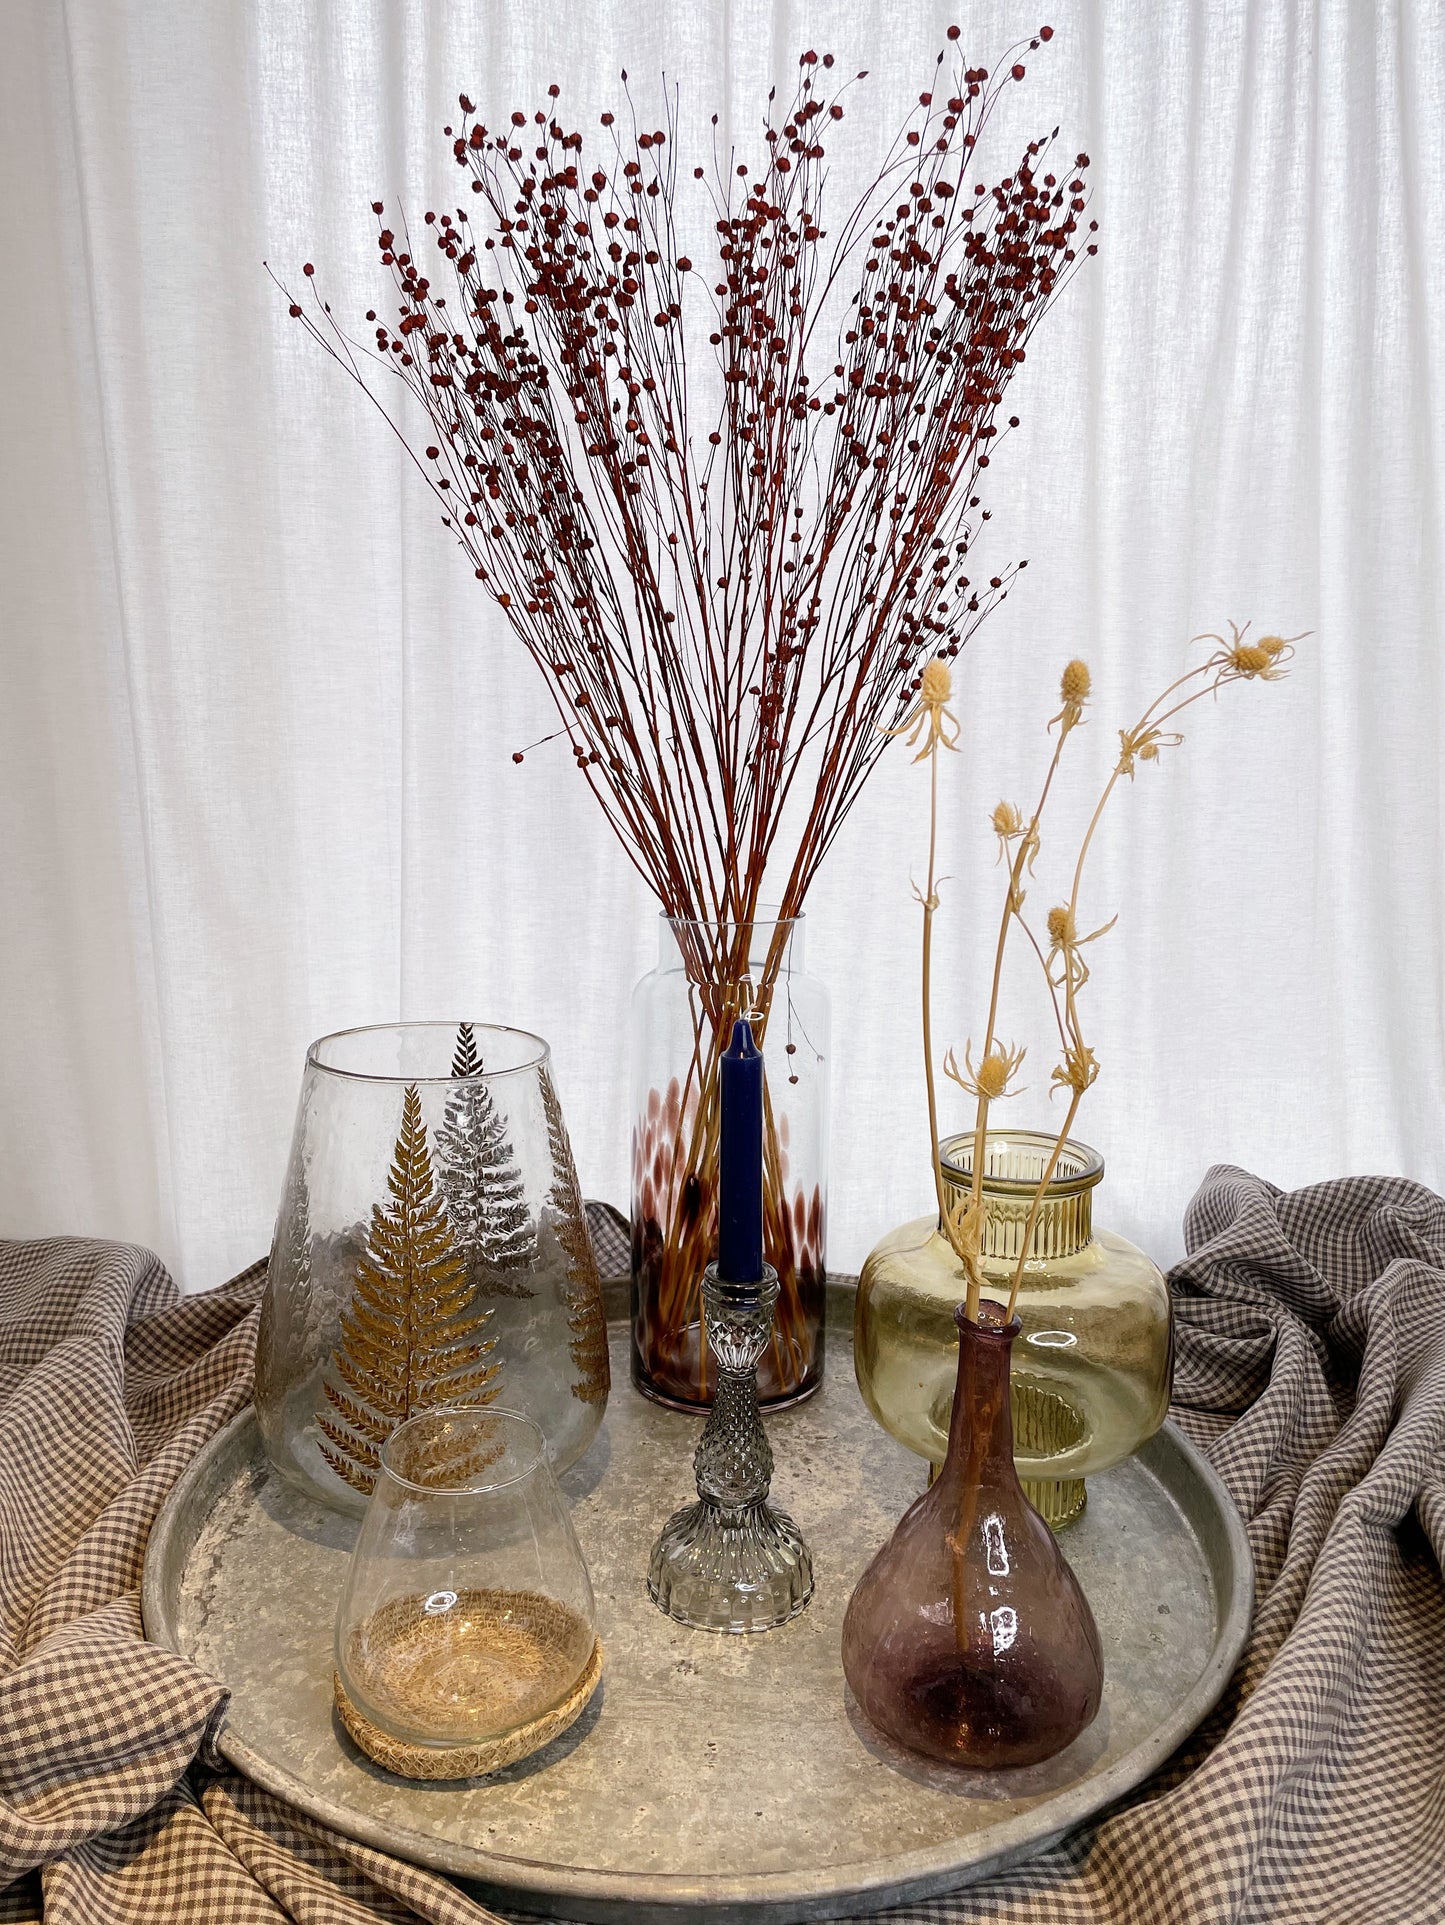 A selection of glass vases and candlesticks/votives on top of a large grey metal tray